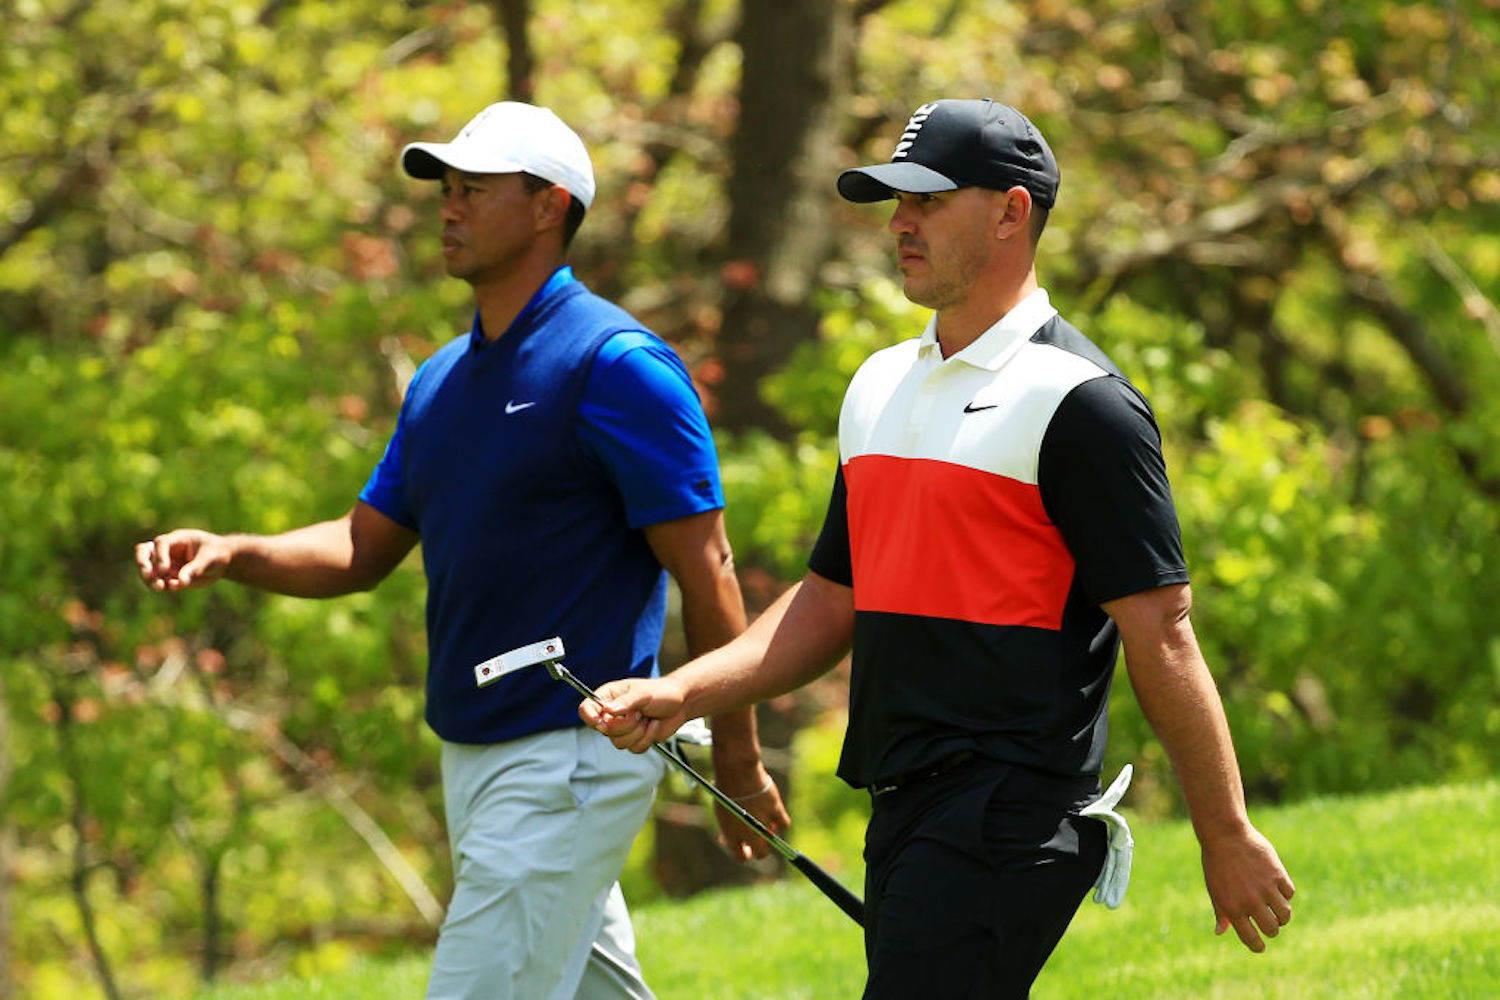 The first major of 2020 if finally here. Here's a look at the 2020 PGA Championship betting odds, picks, and longshots with great value.